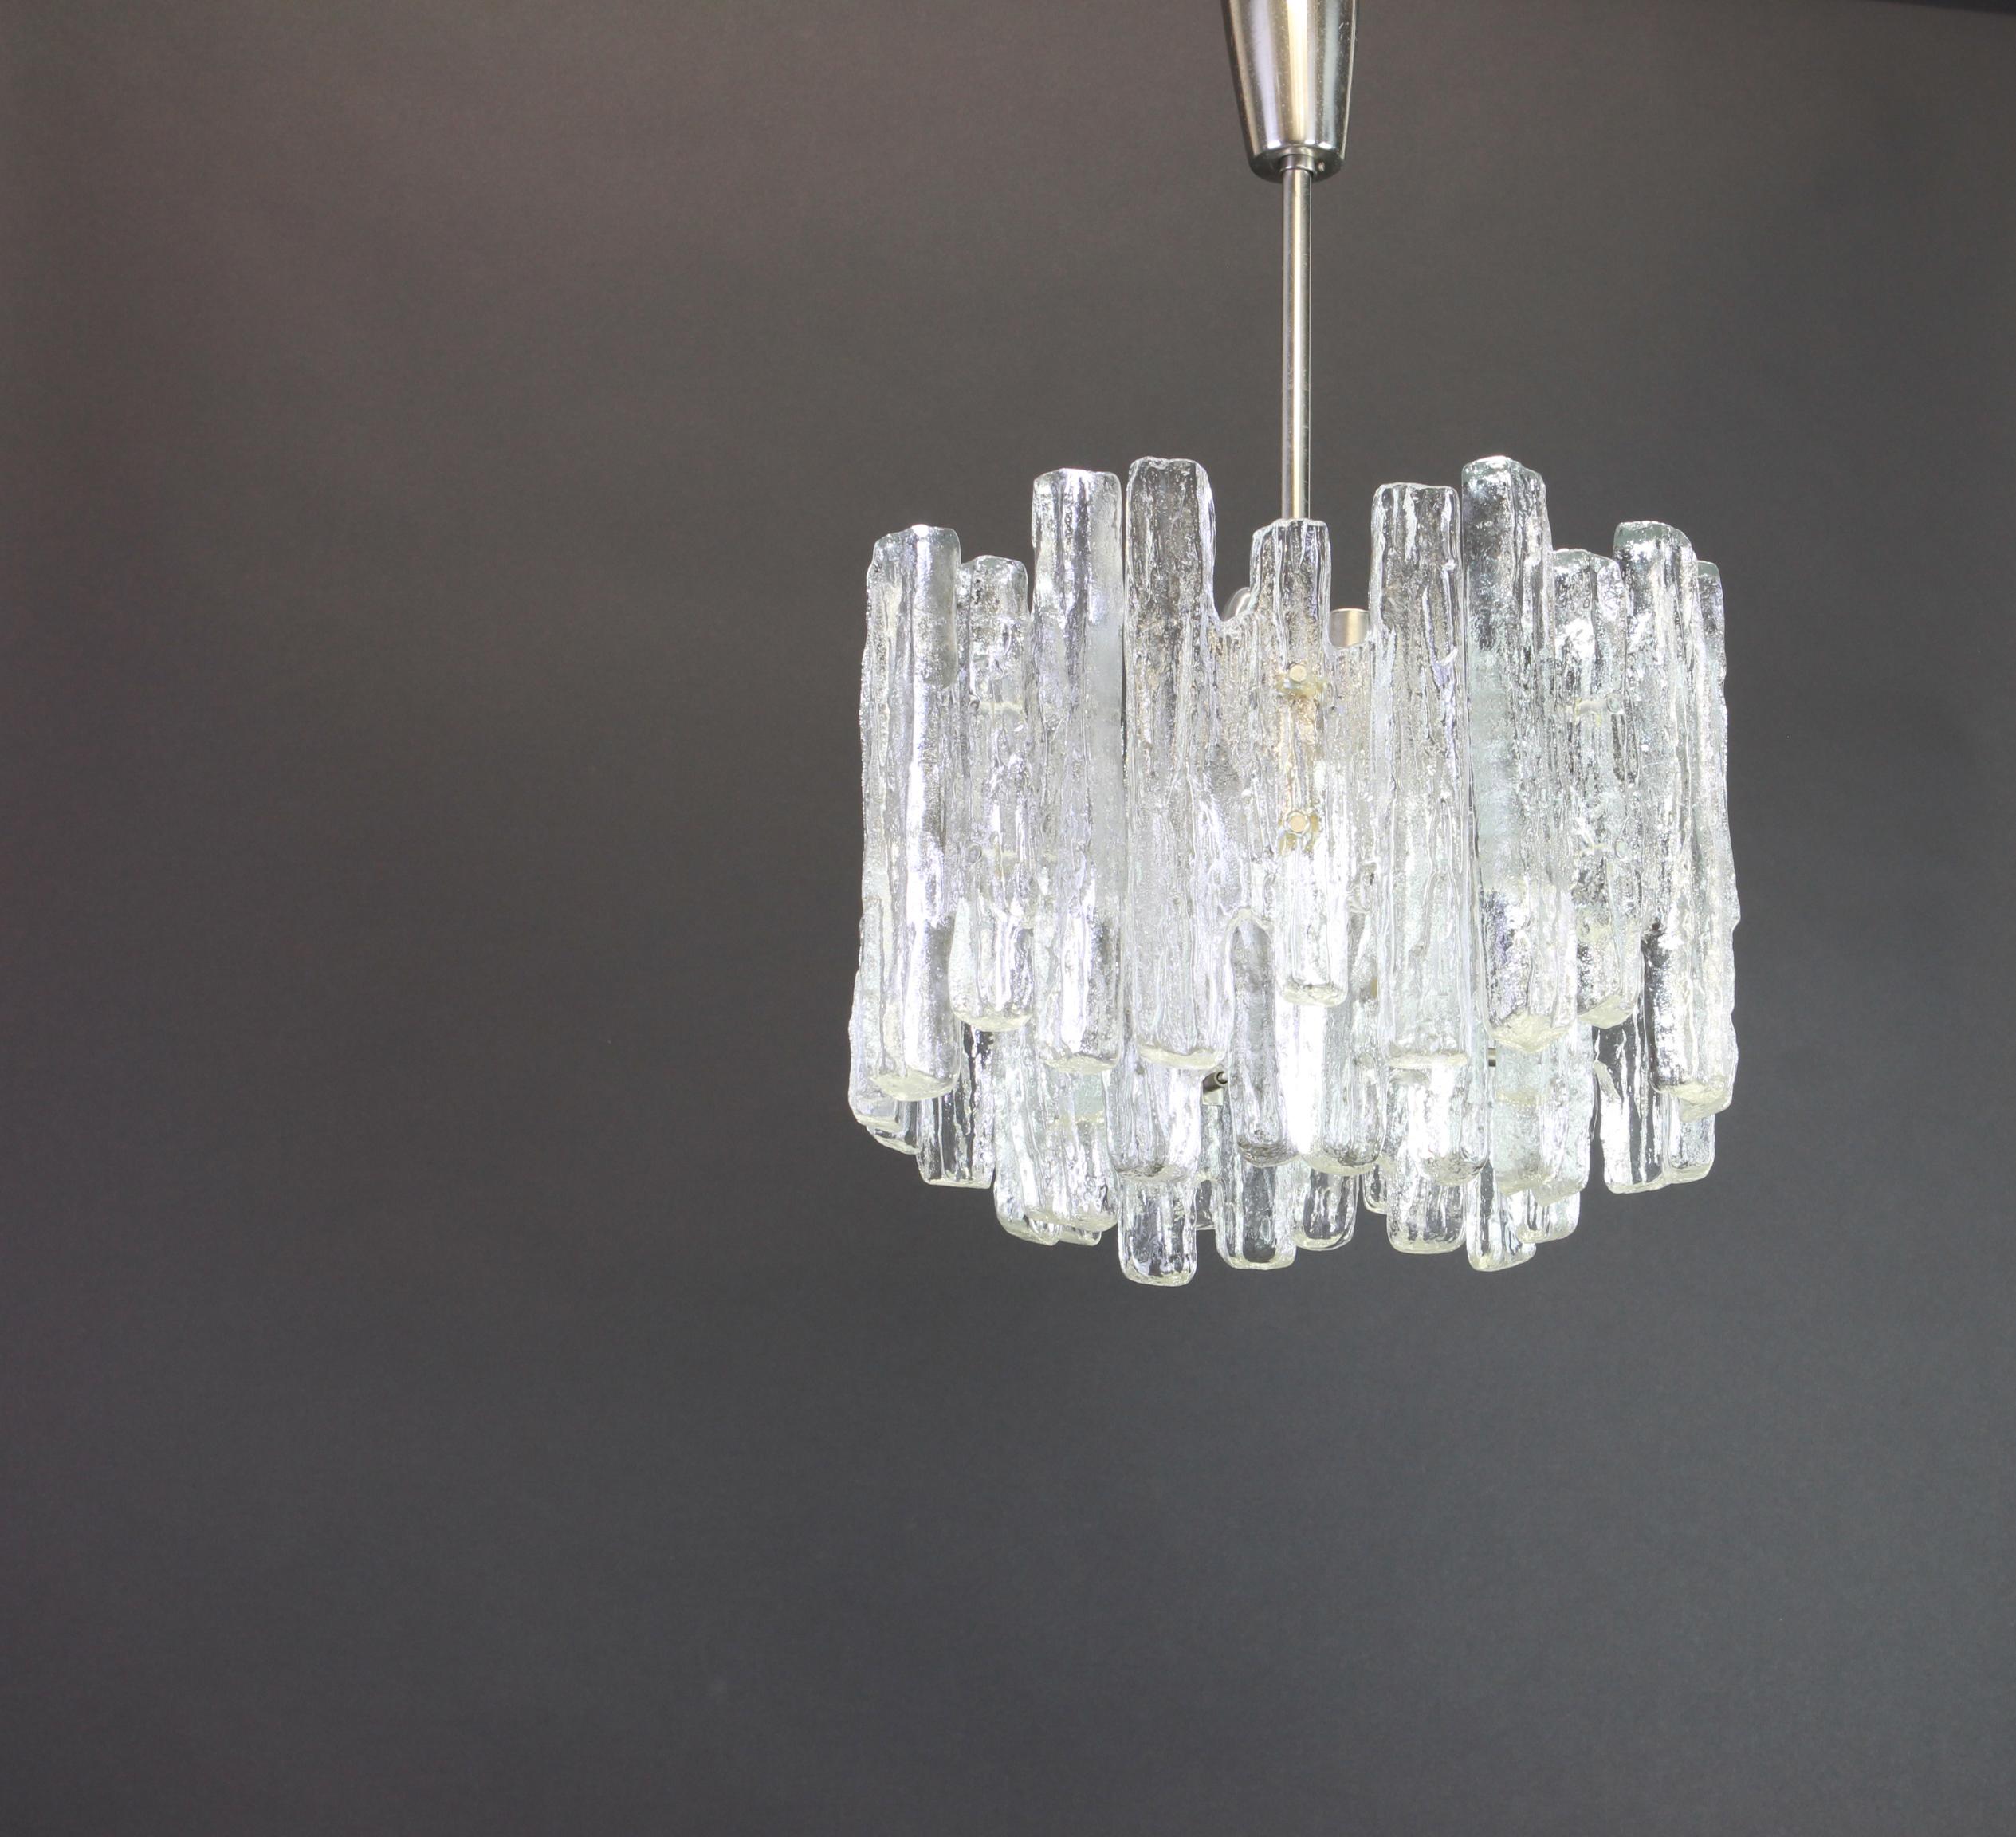 Stunning Murano glass chandelier by Kalmar, 1960s
Three tiers structure gathering 28 structured glasses, beautifully refracting the light very heavy quality.

High quality and in very good condition. Cleaned, well-wired and ready to use. 

The